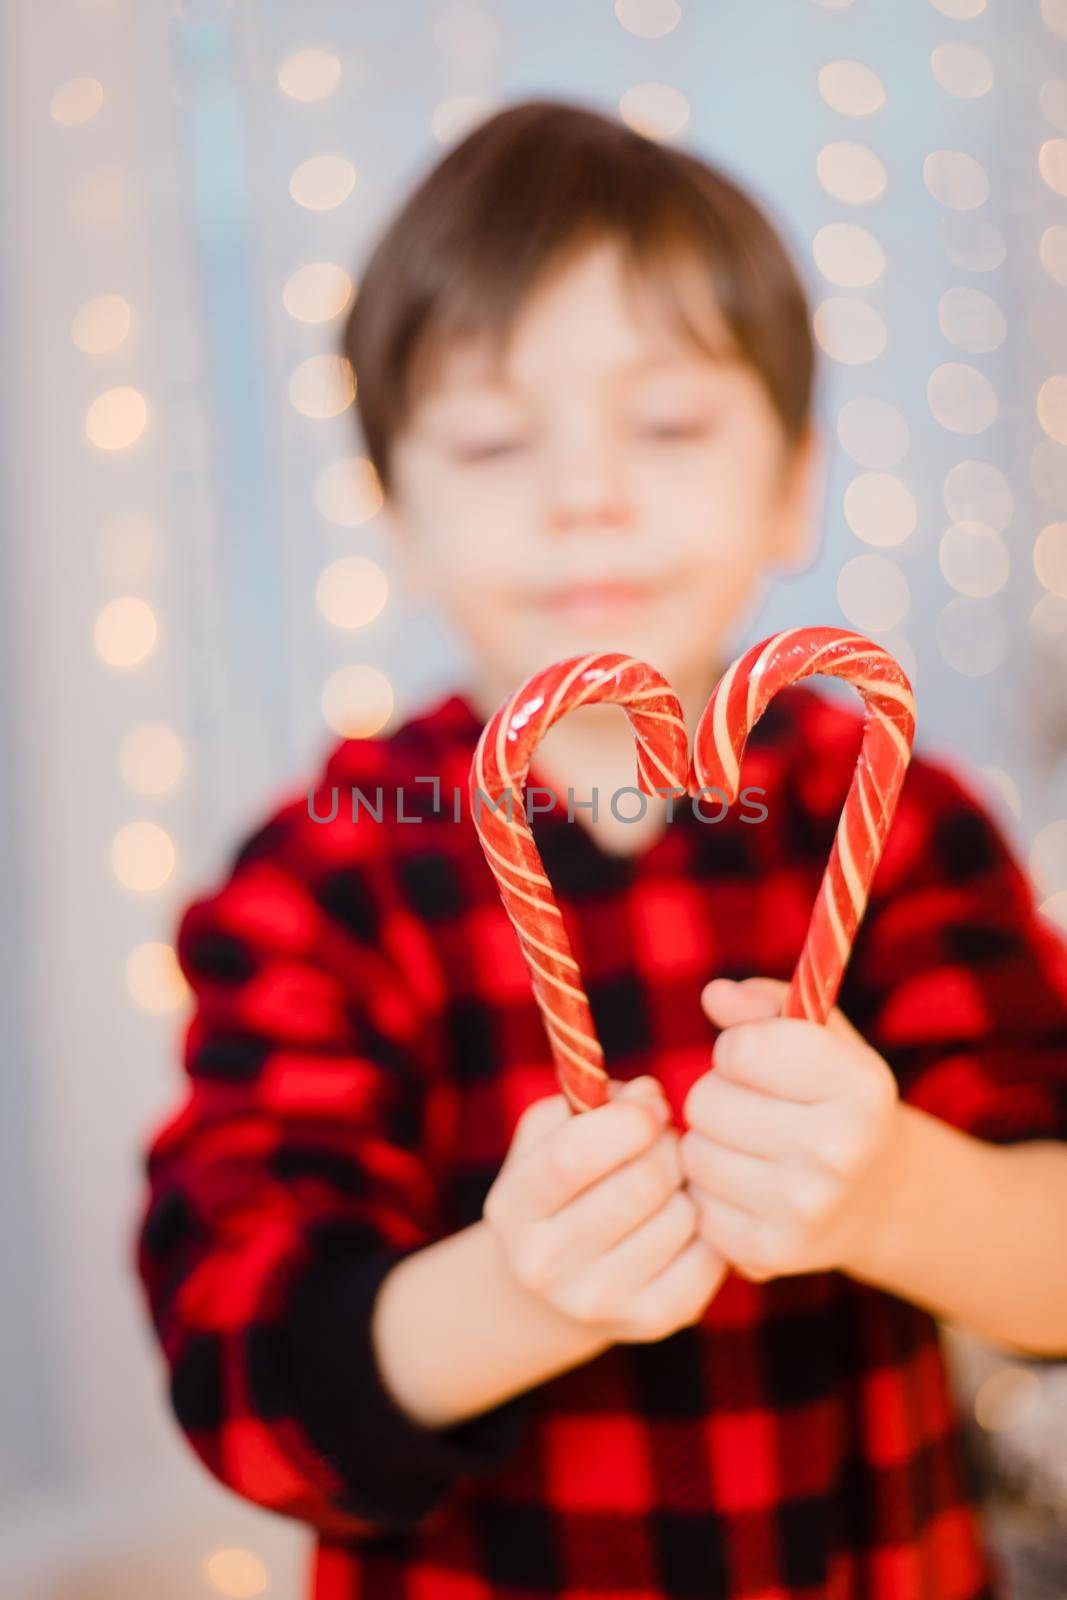 A boy in pajamas with caramel under the Christmas tree . New Year's candies are red. New Year's mood.